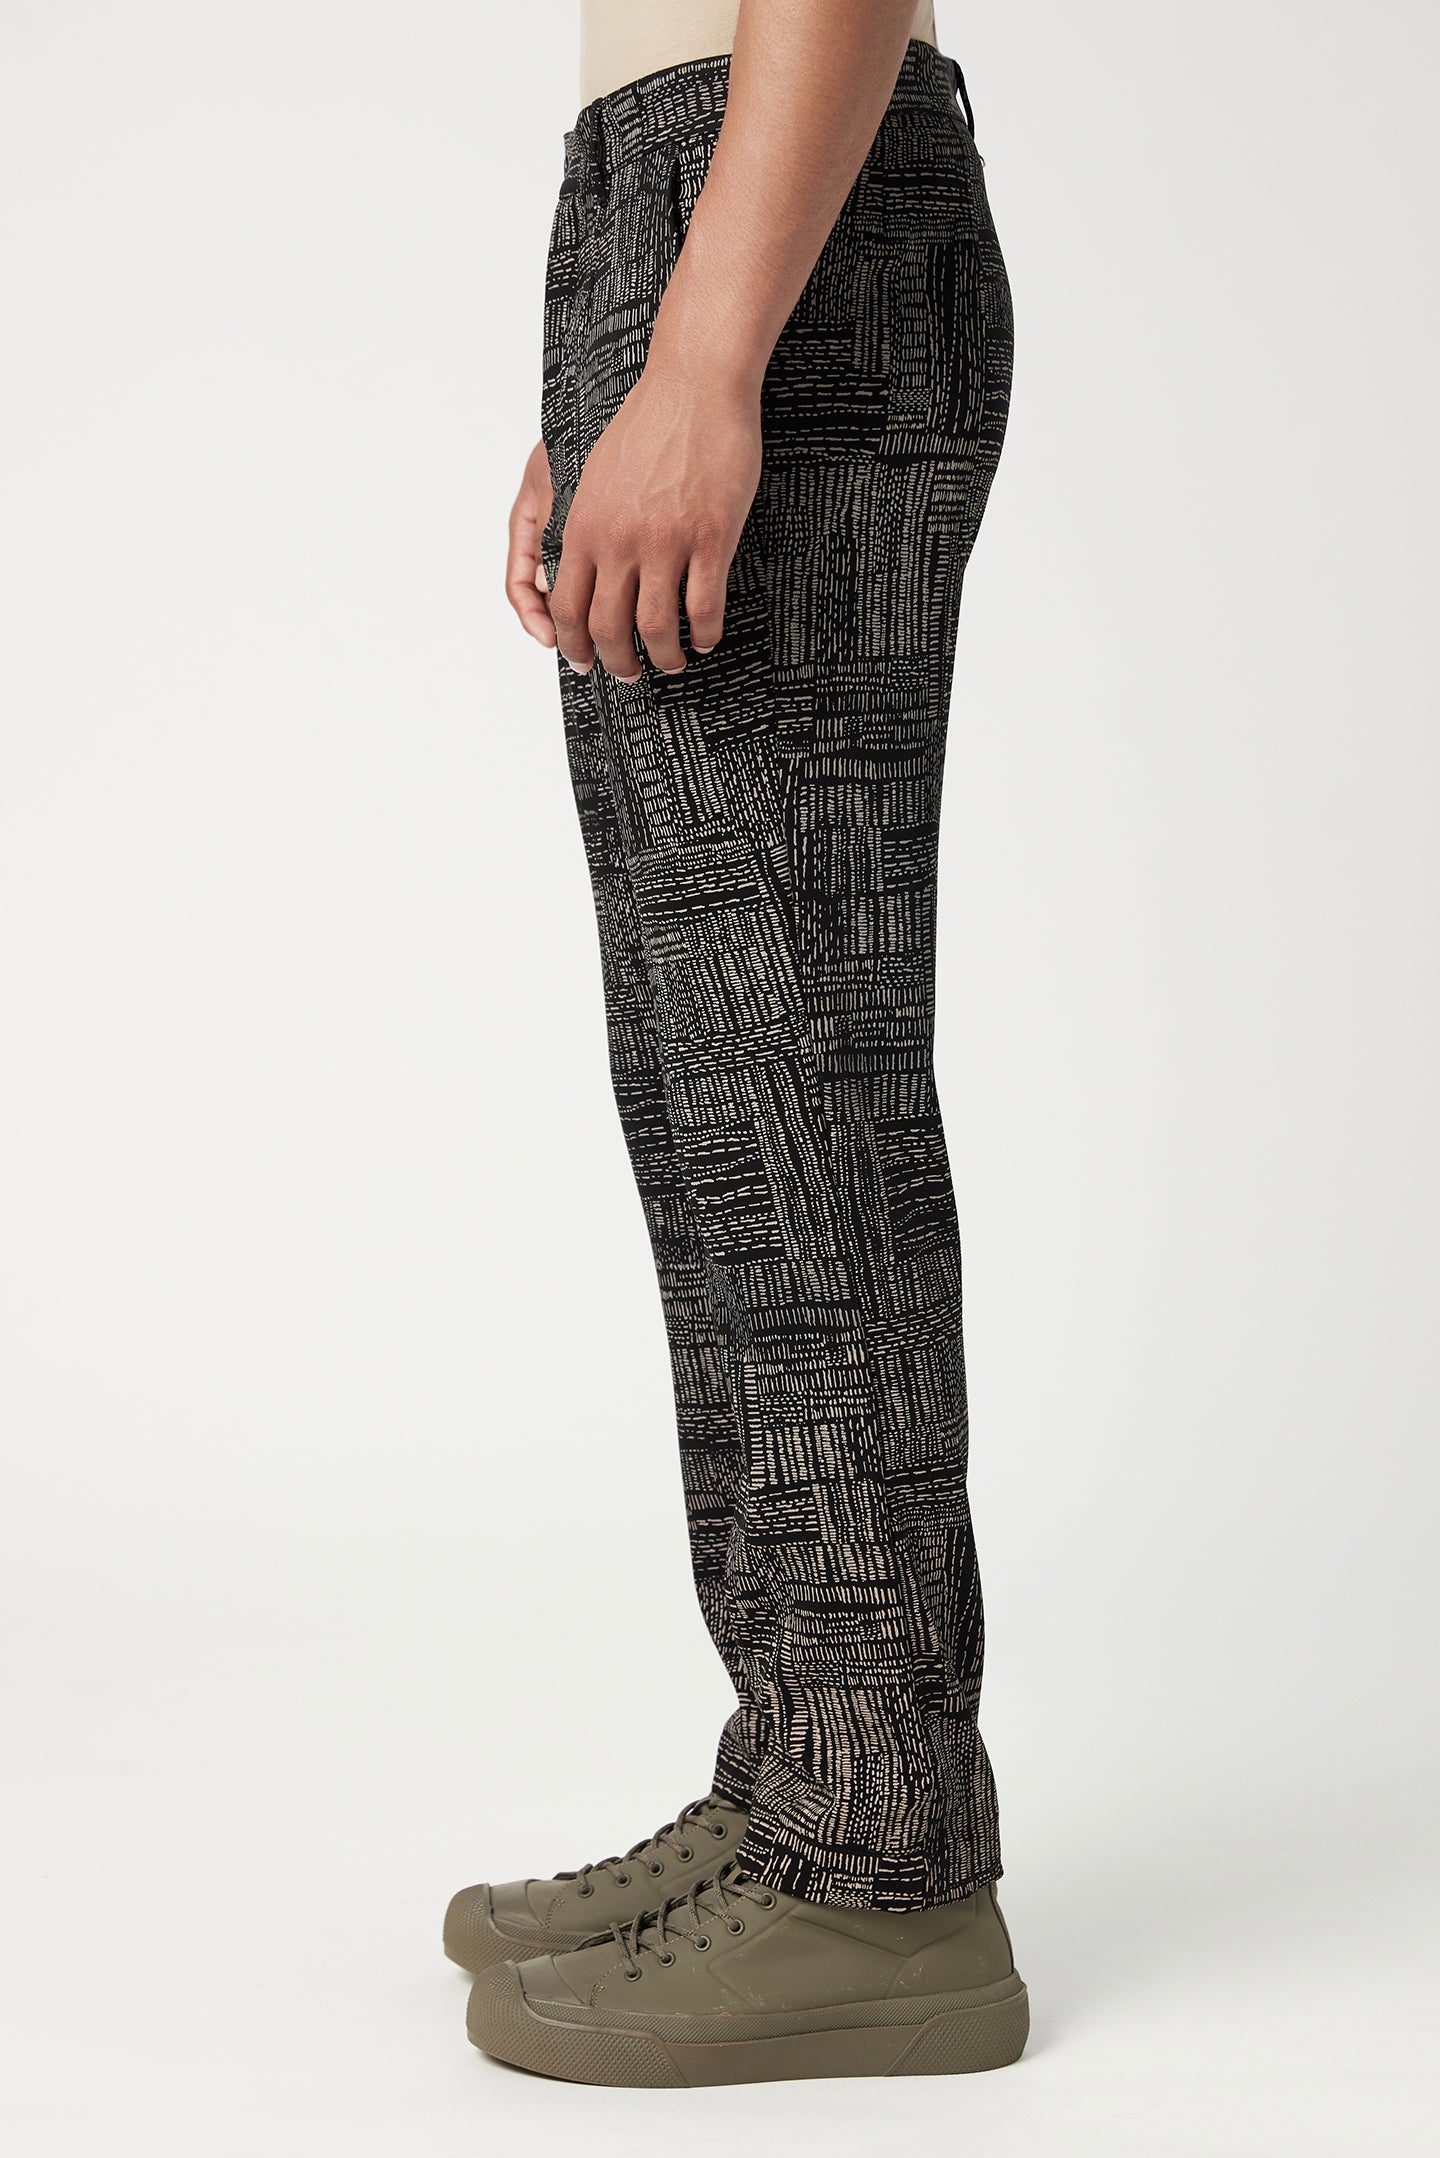 Slim Fit Trousers with All-Over Kantha Print